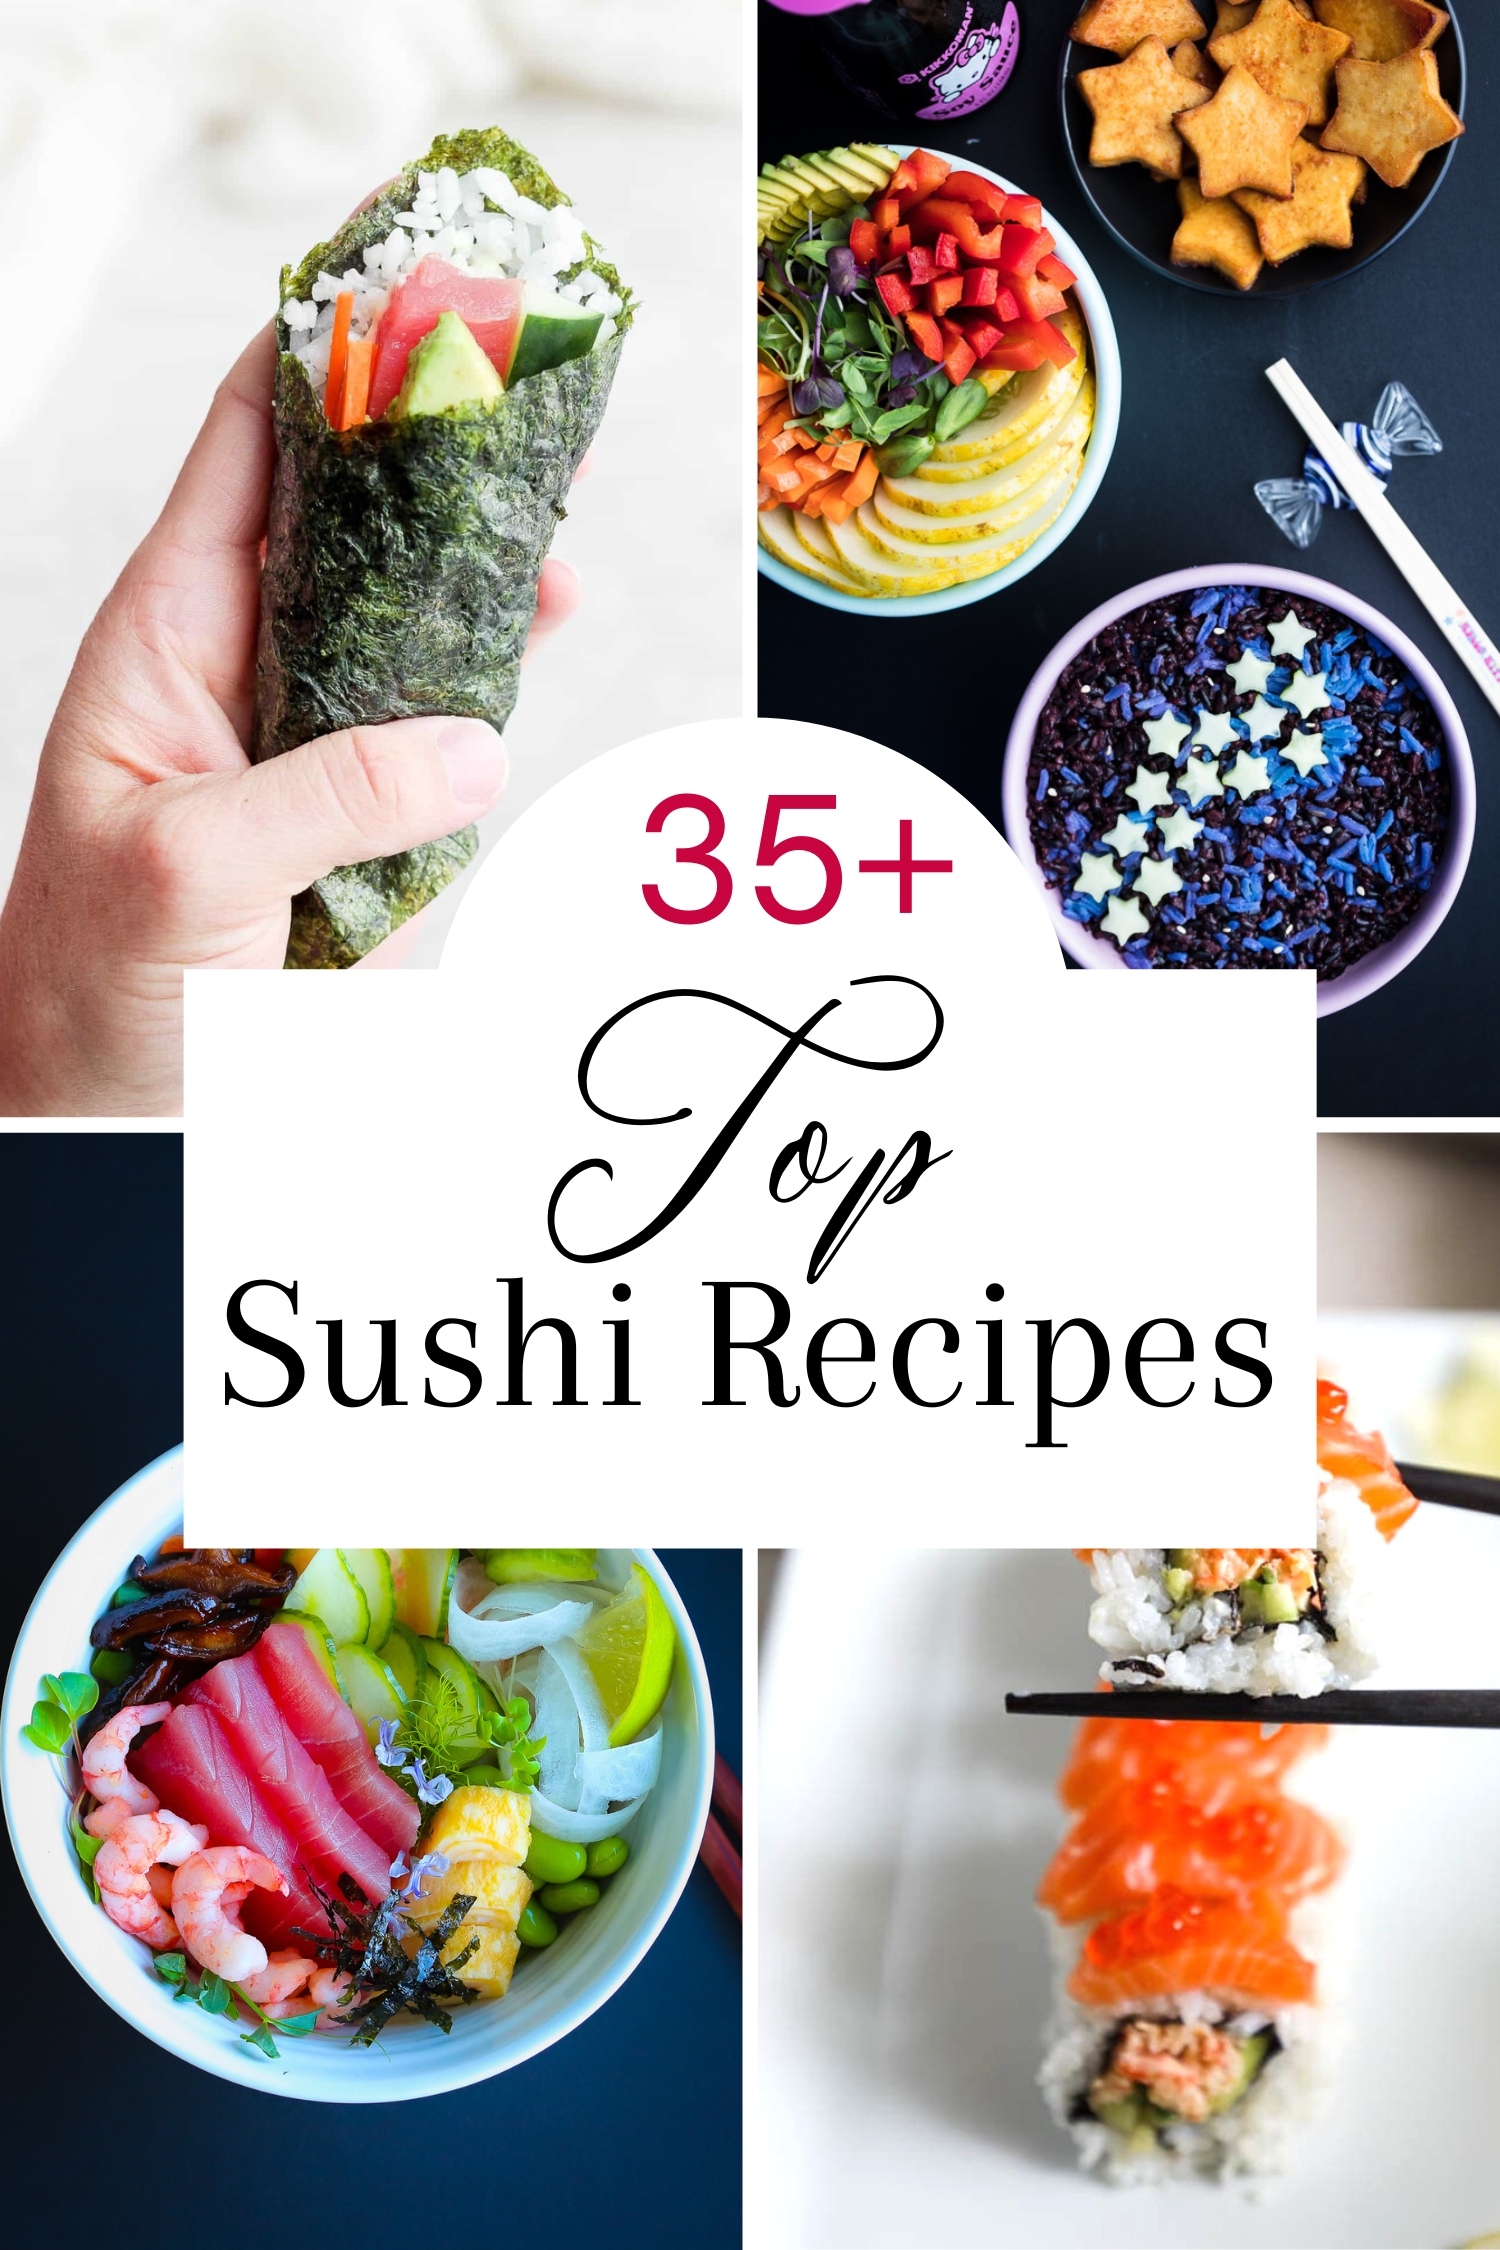 Collage of 4 photos depicting different sushi with text overlay, "35+ Top Sushi Recipes".